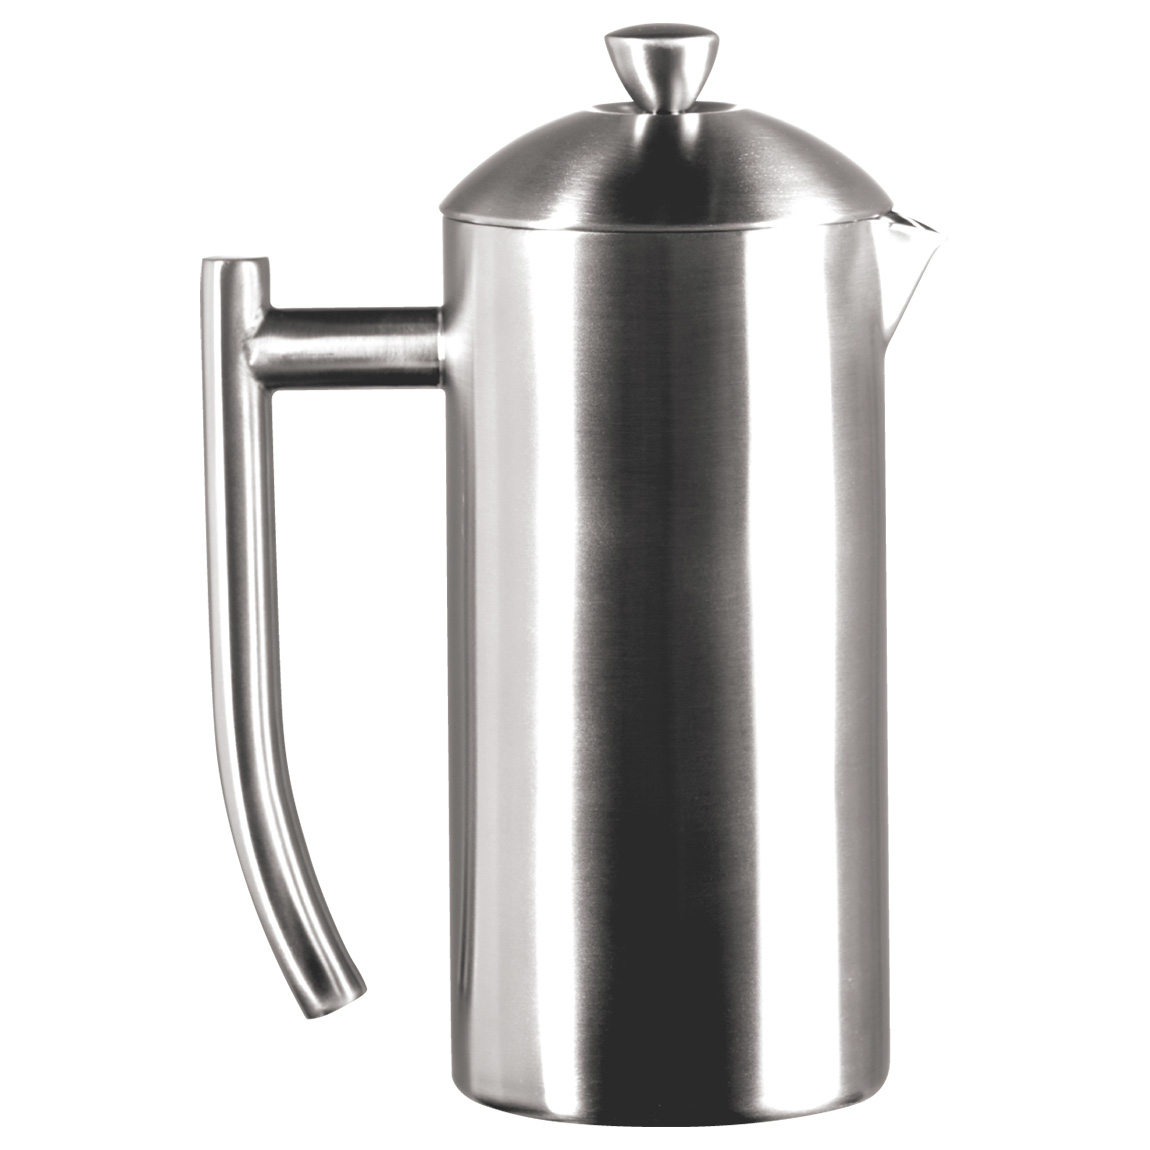 Frieling Brushed 18/10 Stainless Steel French Press Coffee Maker, 17 Frieling 17 Oz. Insulated Stainless Steel French Press